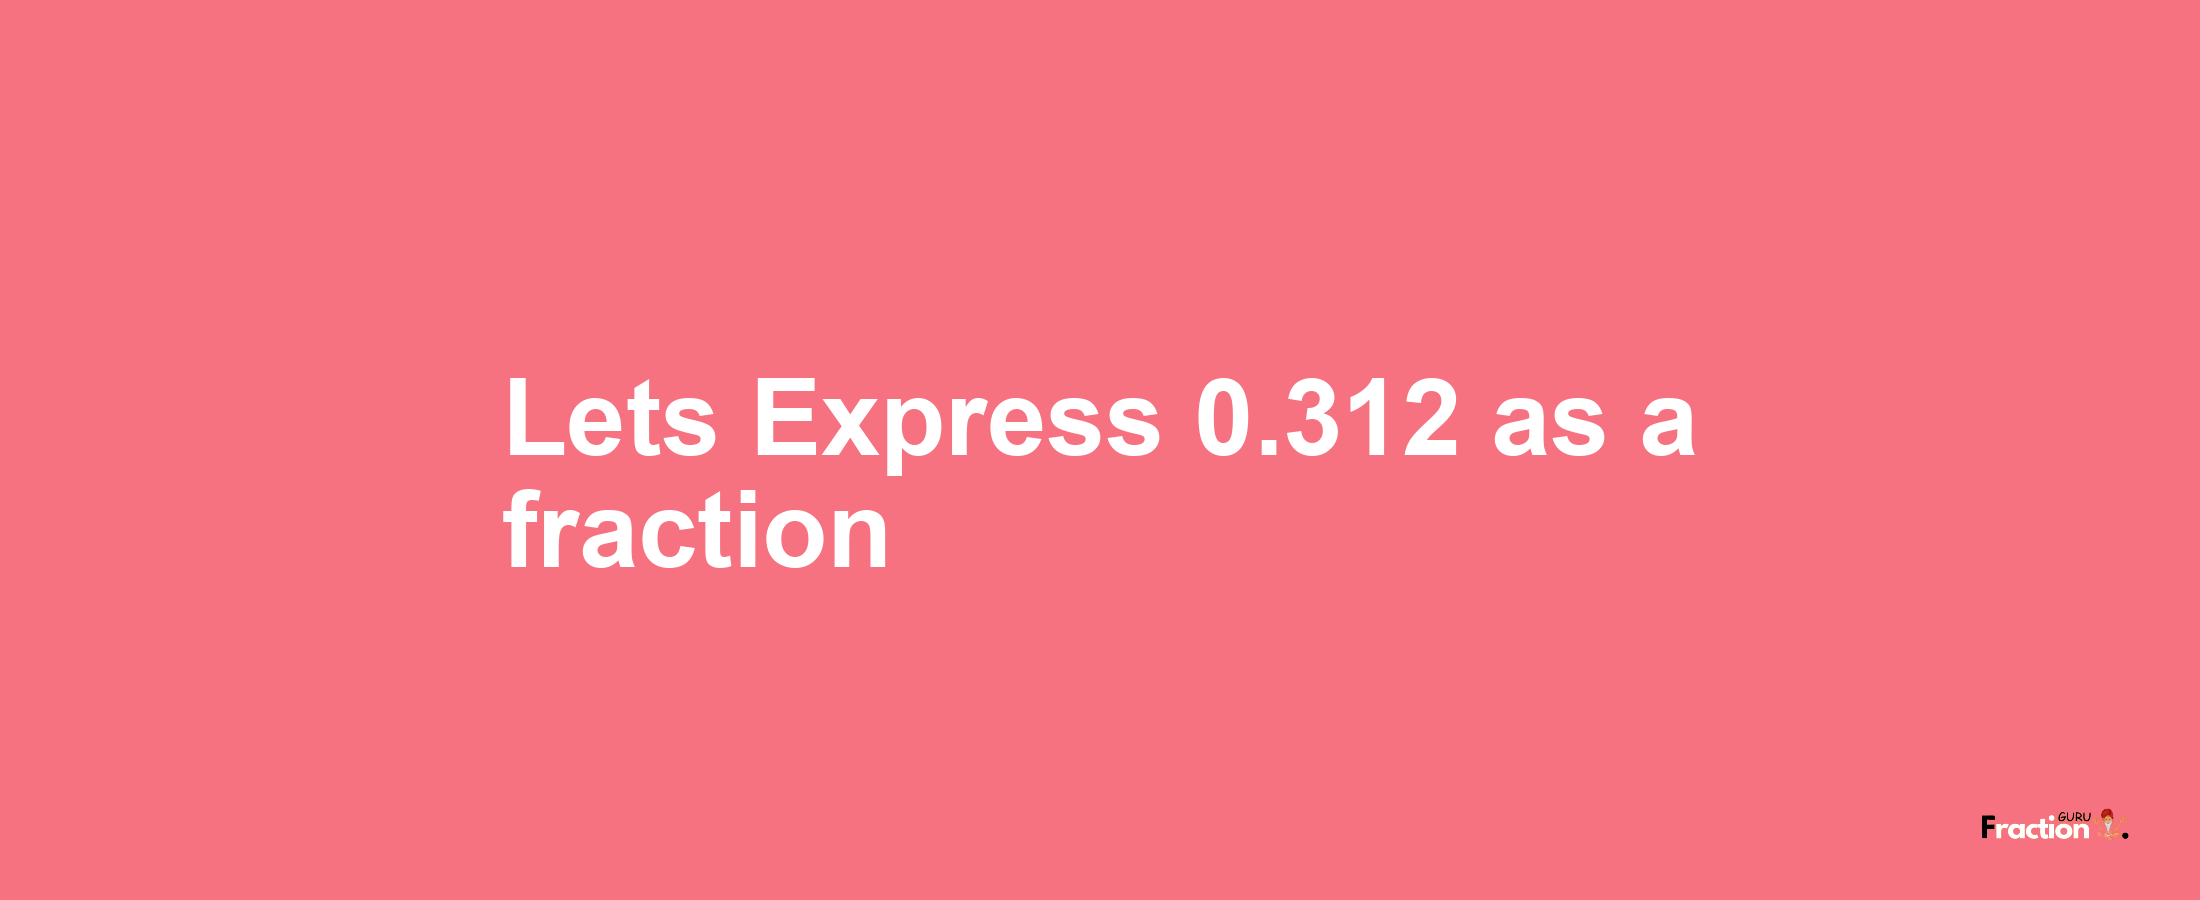 Lets Express 0.312 as afraction